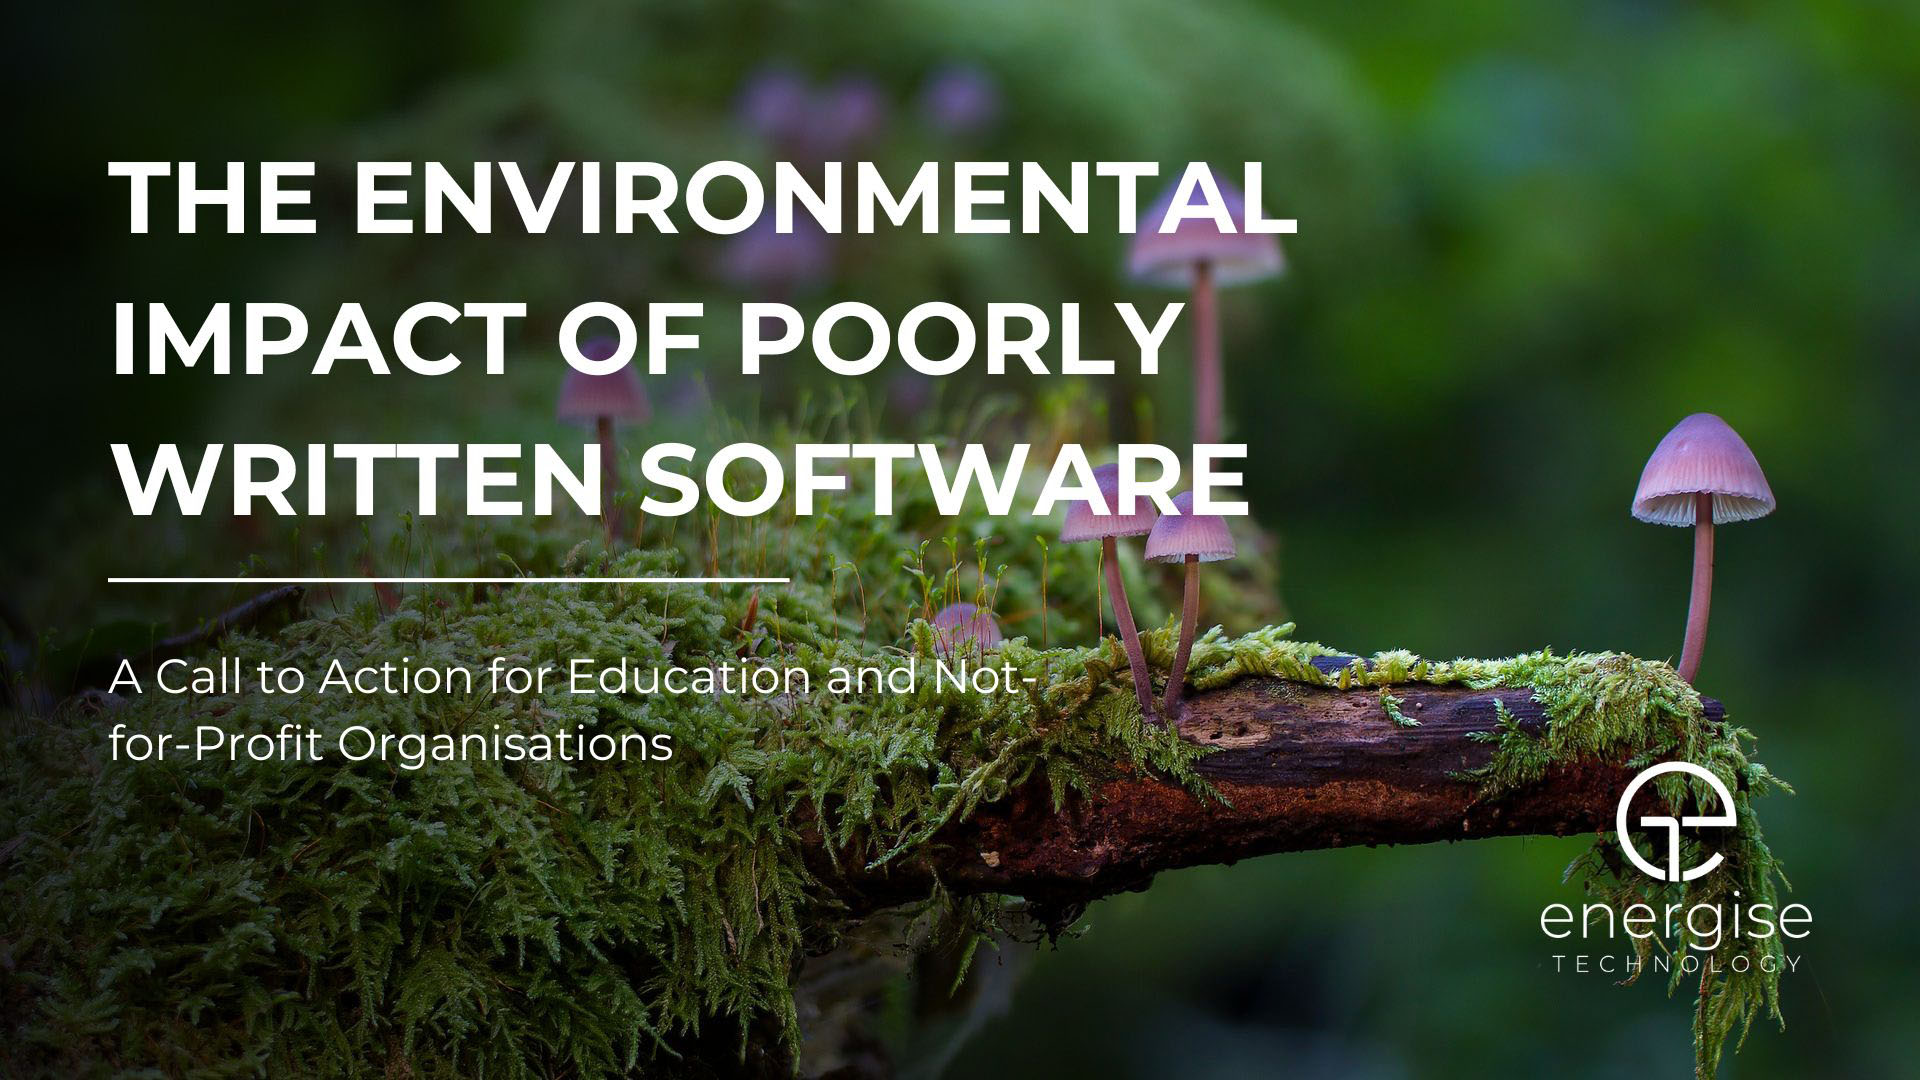 The Environmental Impact of Poorly Written Software: A Call to Action for Education and Not-for-Profit Organisations